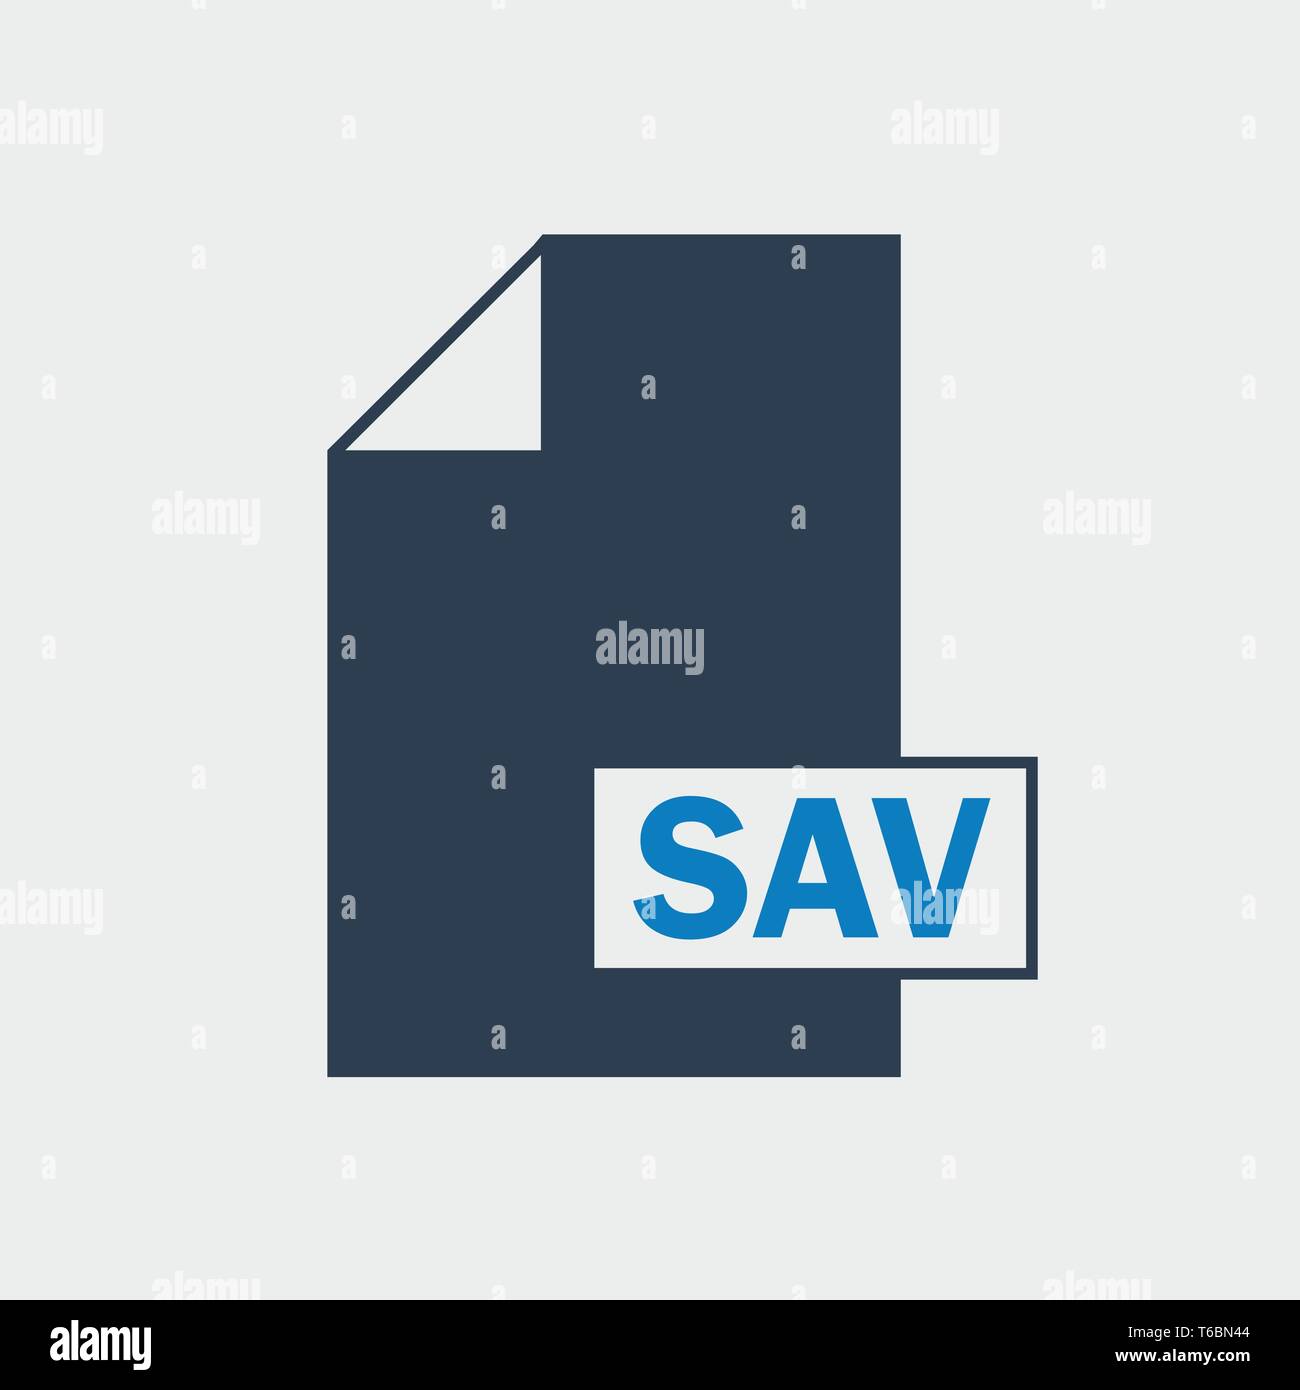 SAV File format icon on gray background Stock Vector